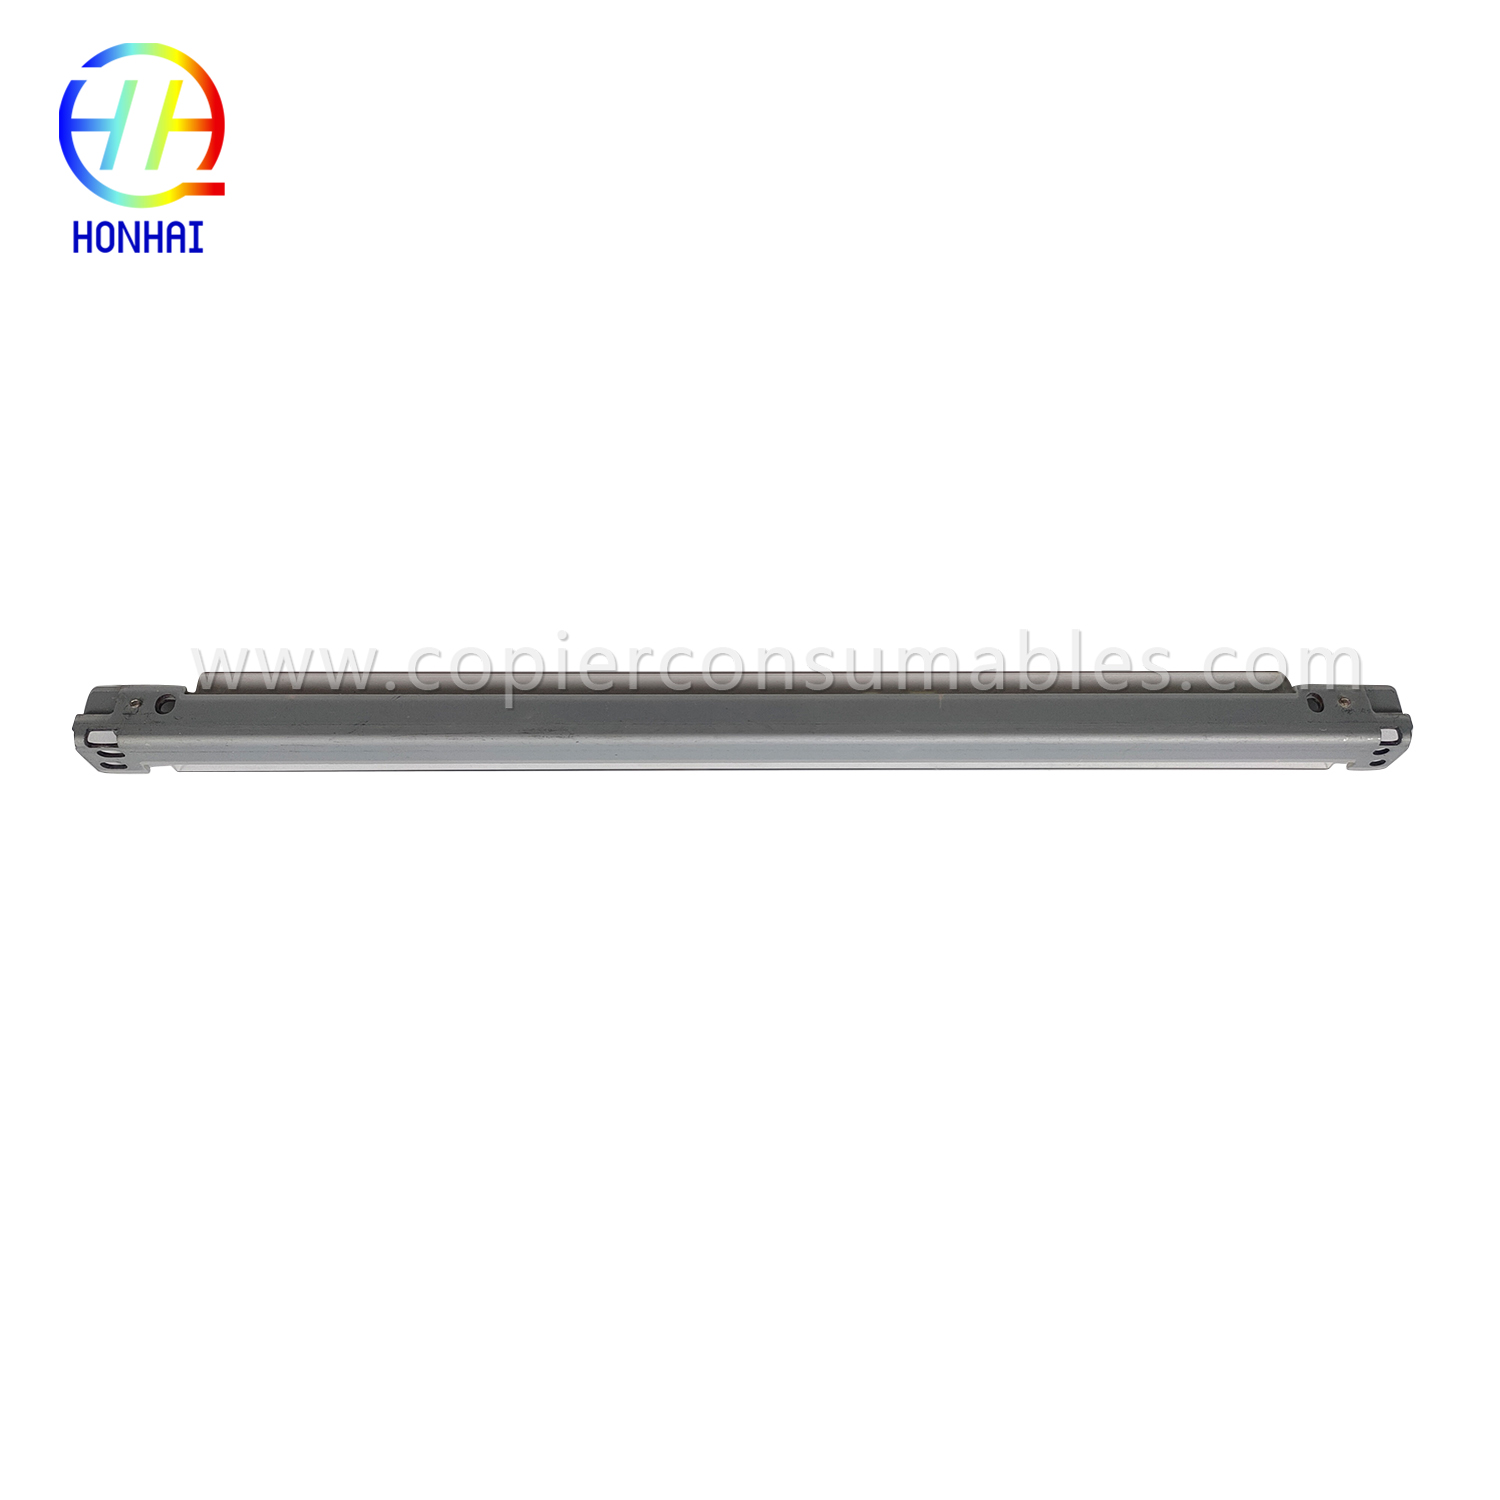 Transfer Belt Cleaning Blade for Ricoh Aficio 1060 1075 2051 2060 2075 MP5500 6000 6001 6002 6500 7000 7001 7500 7502 8000 8001 9001 9002 9100DN (AD041126)  (2)